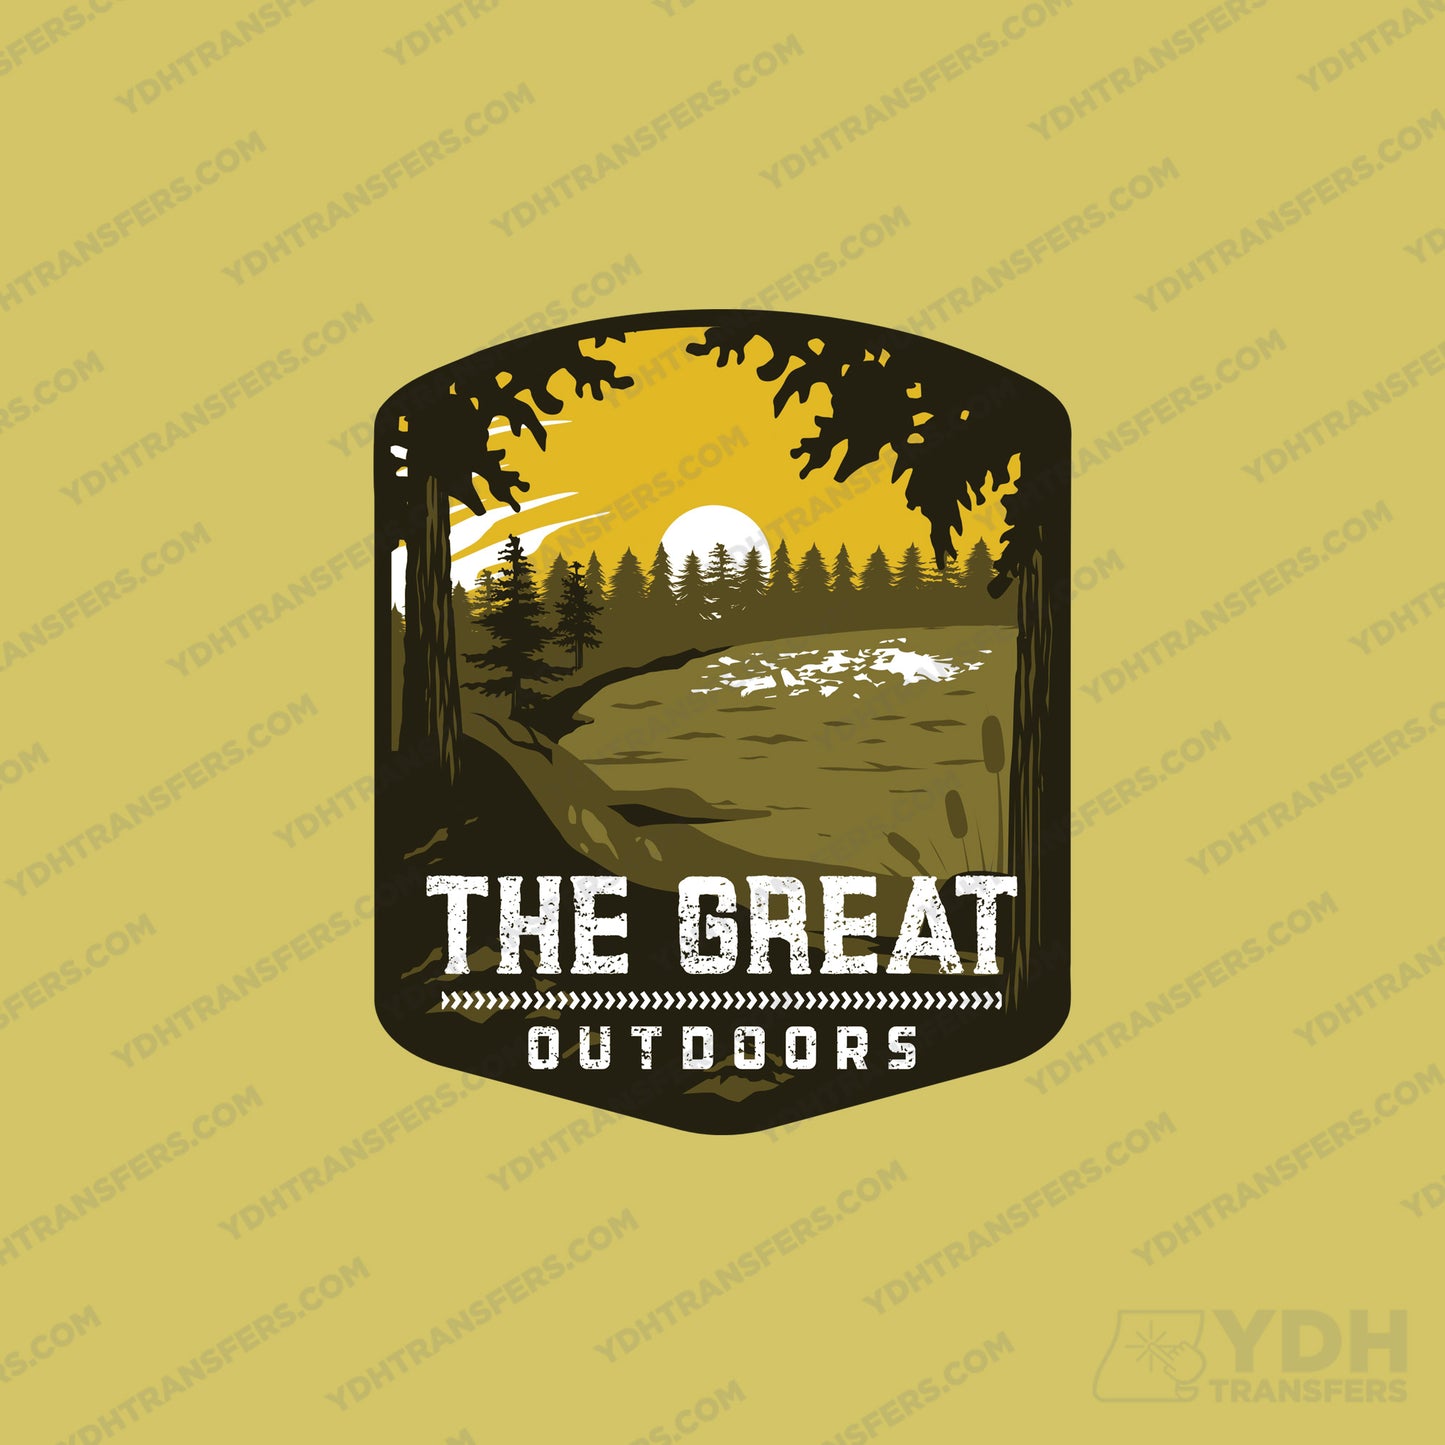 The Great Outdoors Full Color Transfer